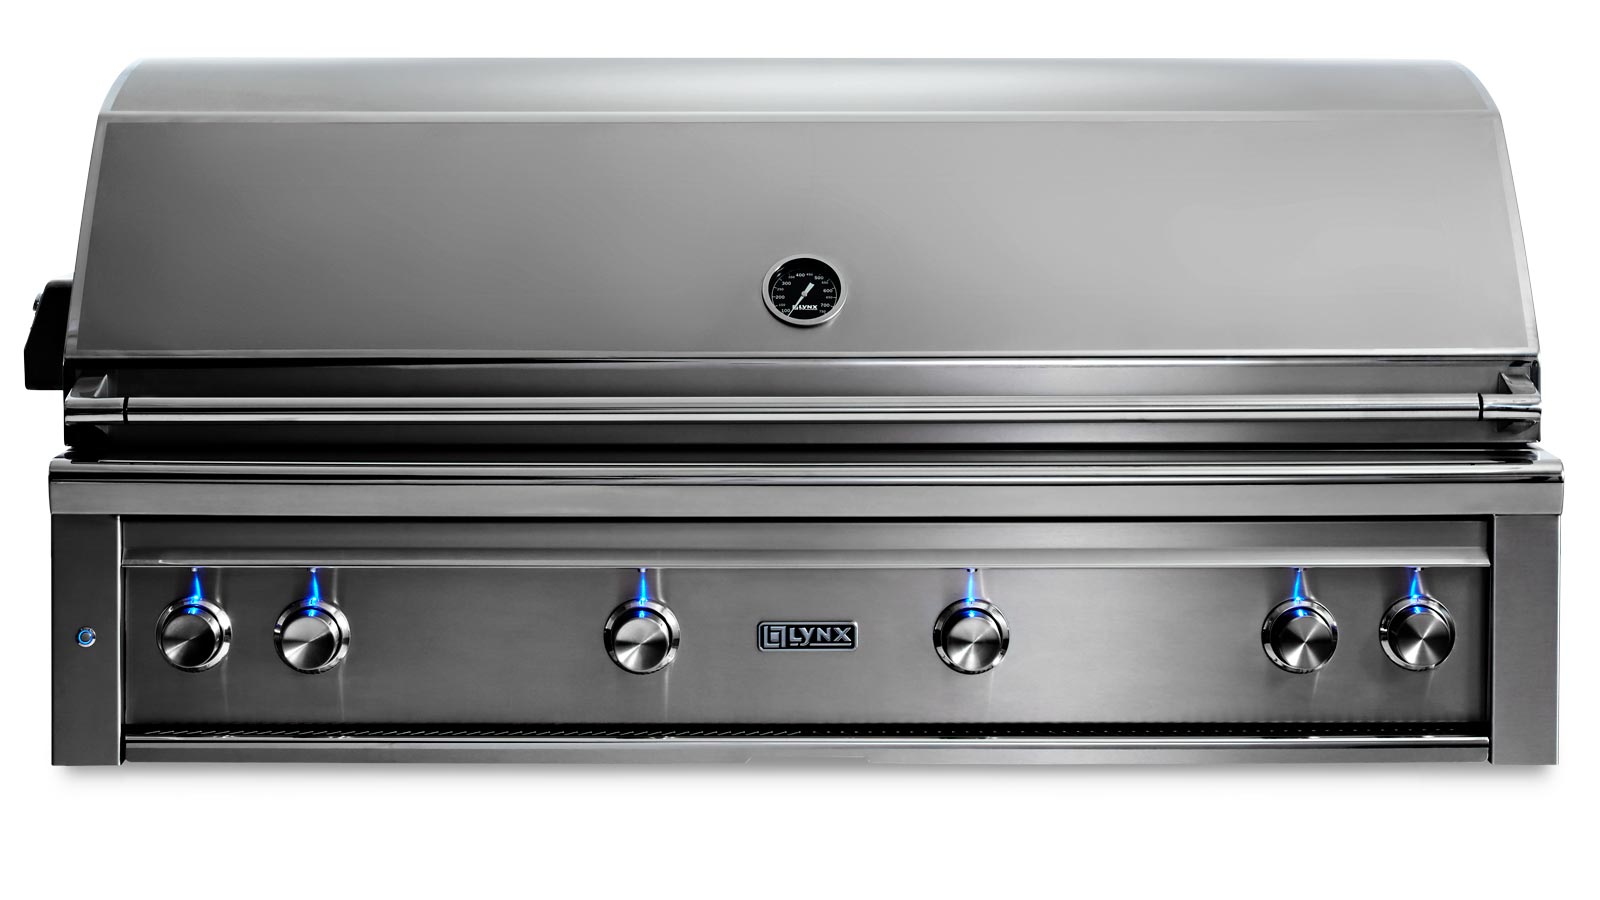 54" Professional Built-in Grill with 1 Trident Infrared Burner and 3 Ceramic Burners and Rotisserie (L54TR)